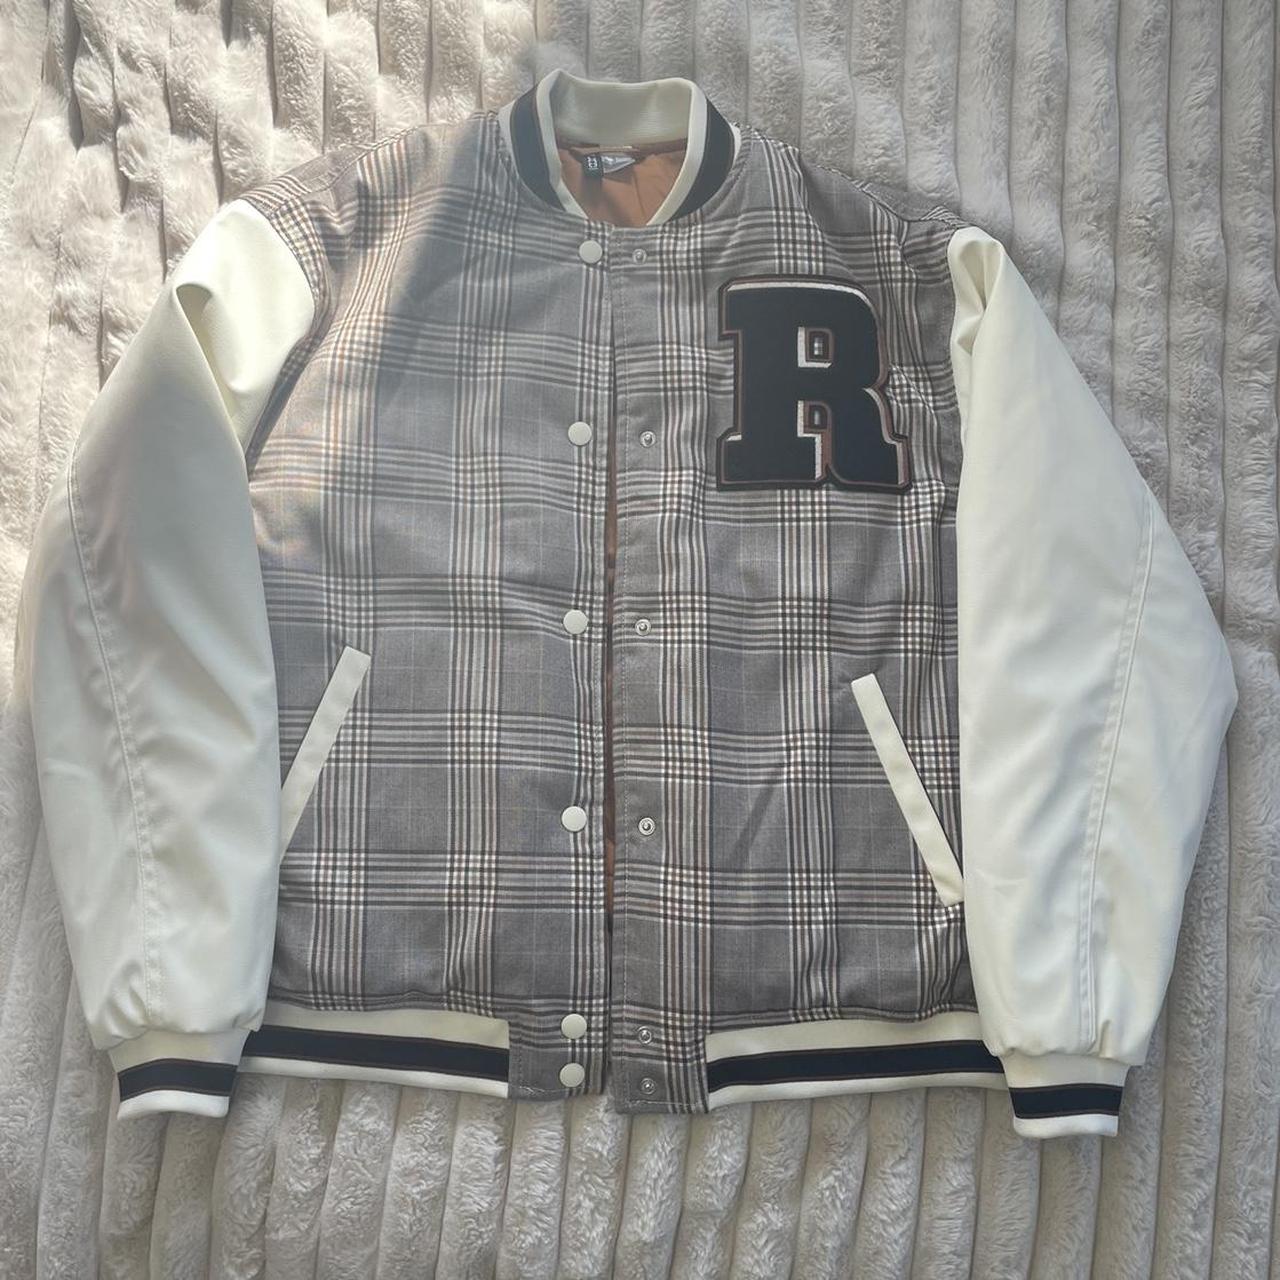 Gucci Varsity Jacket. Brand new with tags. - Depop